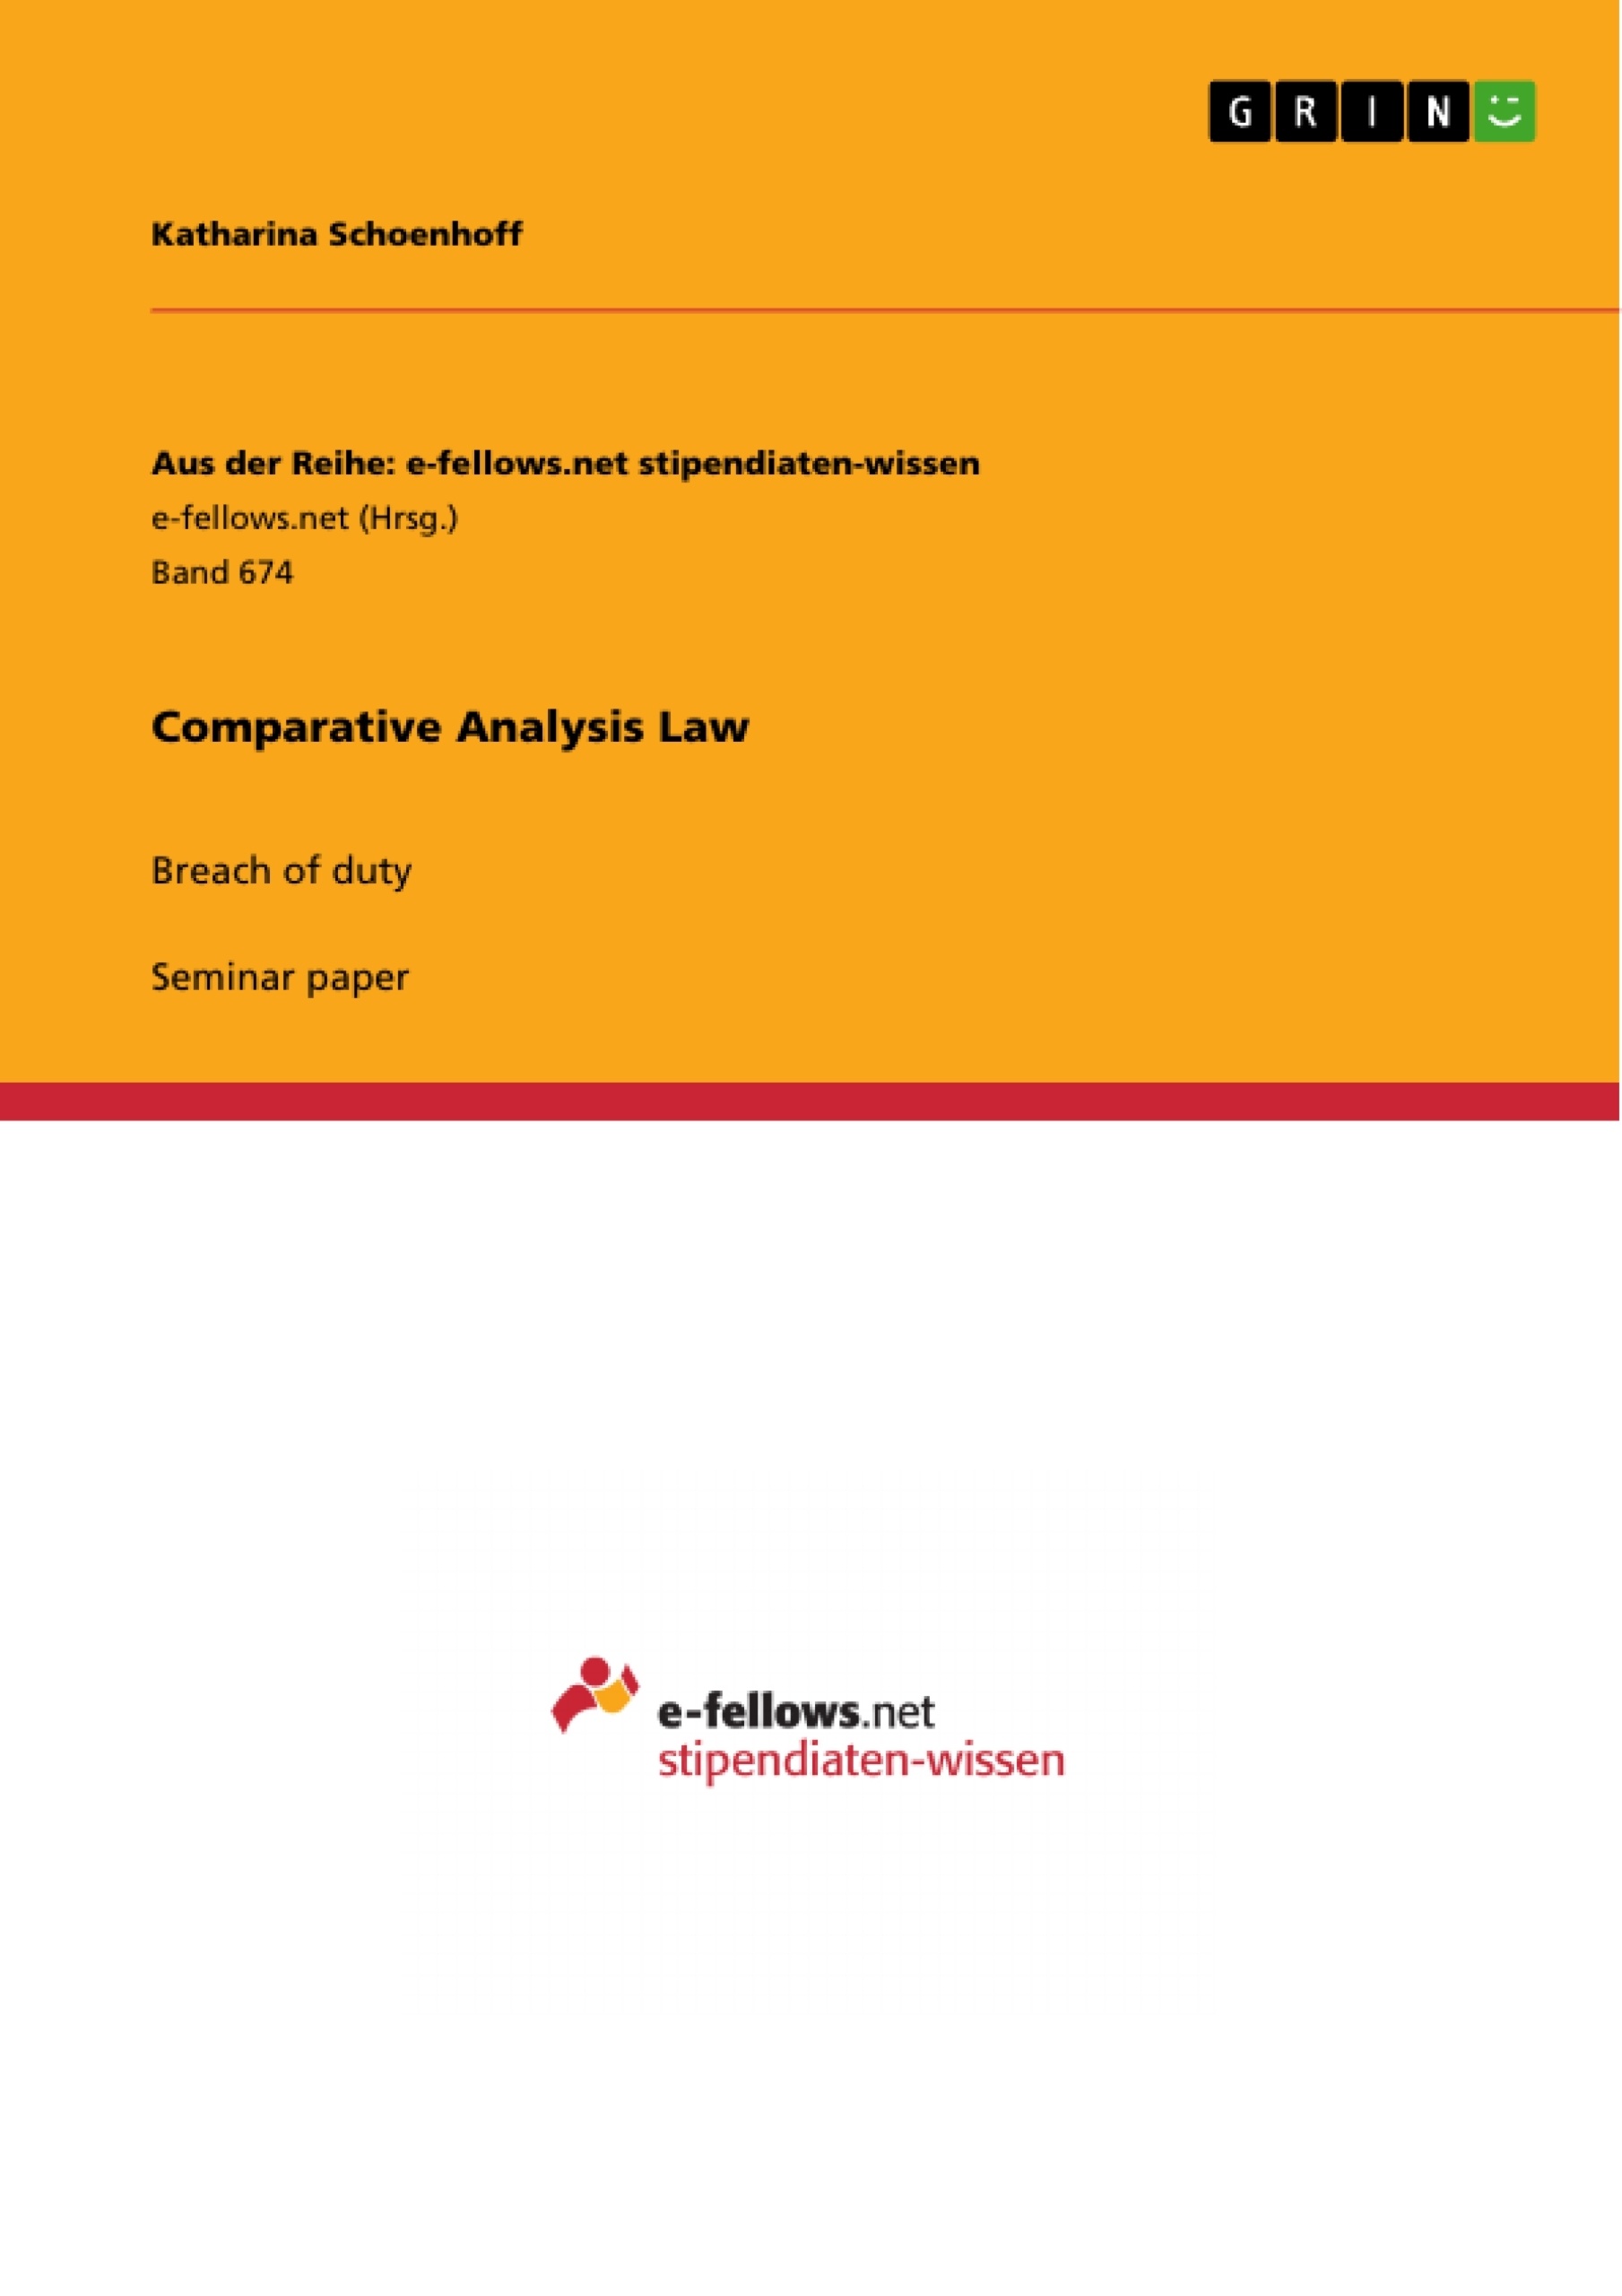 Title: Comparative Analysis Law